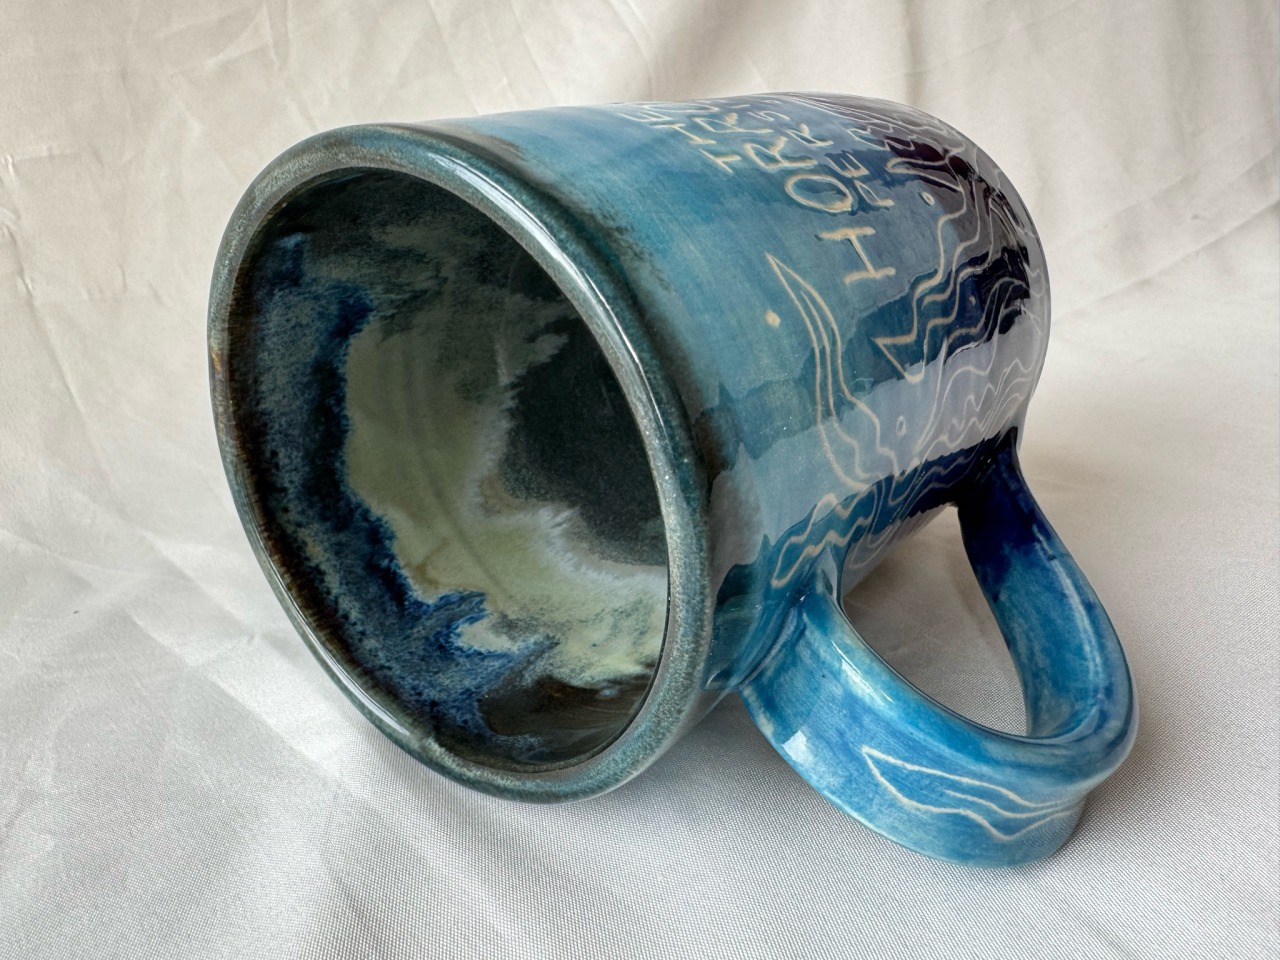 the inside of the mug. it was glazed in blues and greens